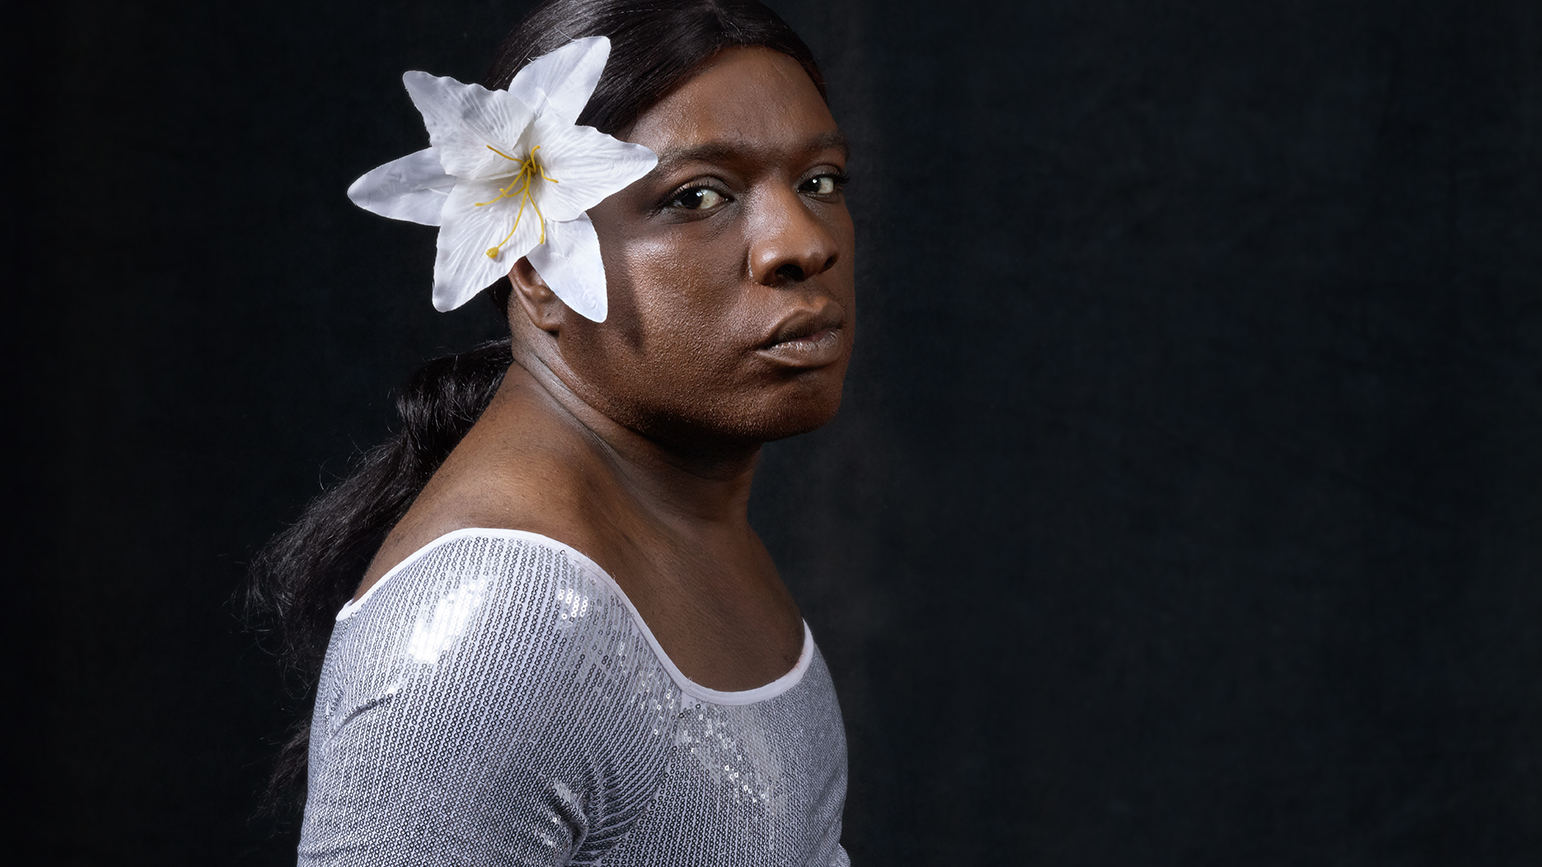 Bust of a person wearing a sparkly leotard with a white flower in their hair facing the camera